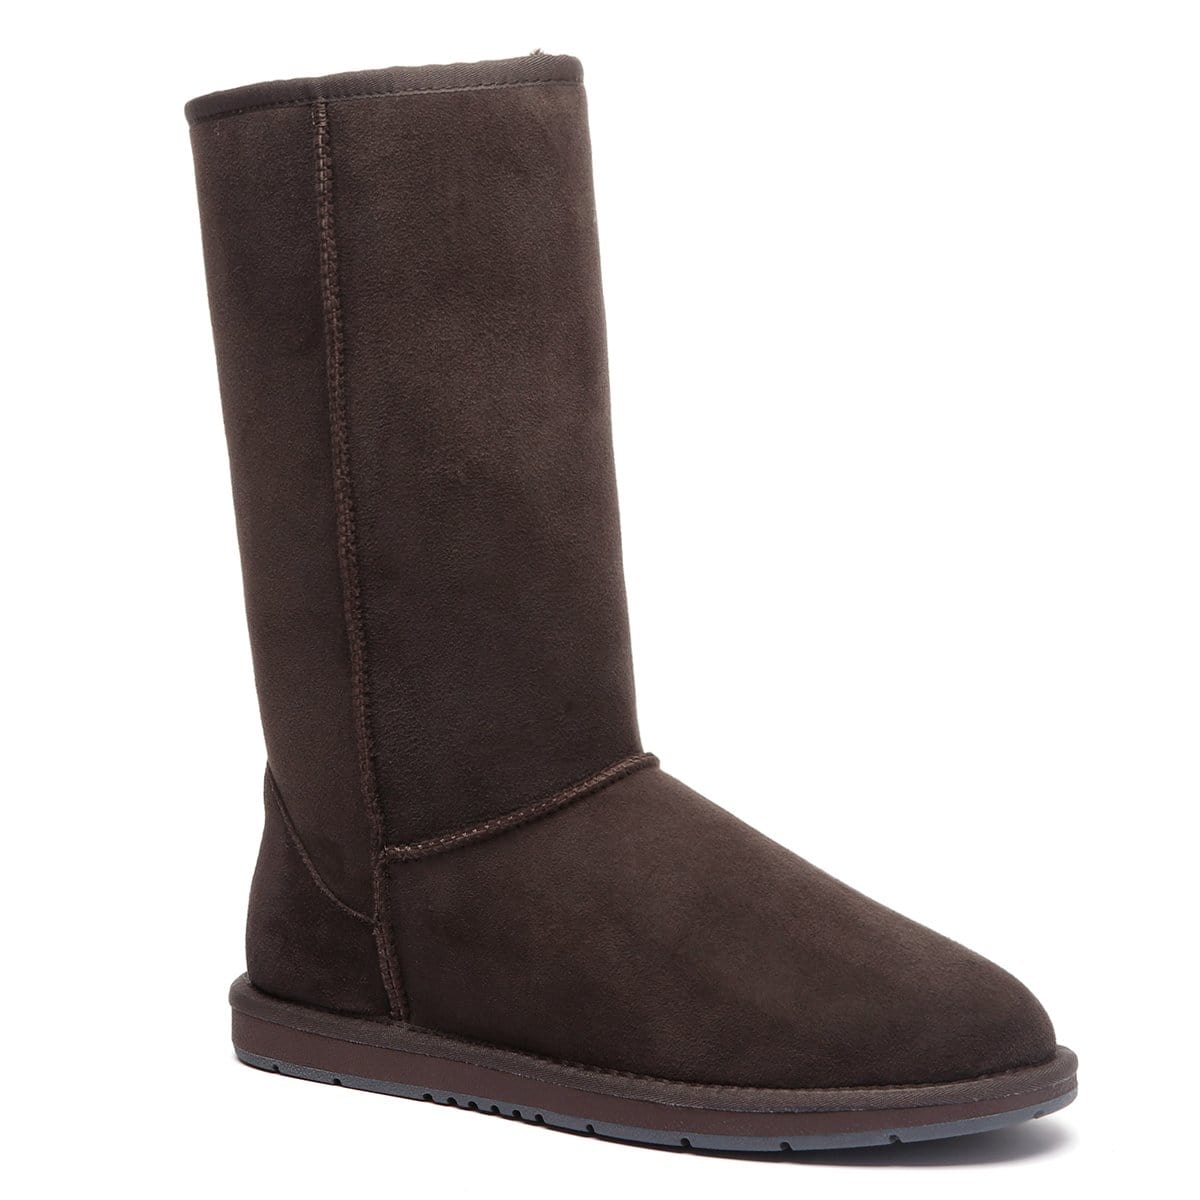 Classic Tall UGG Boots